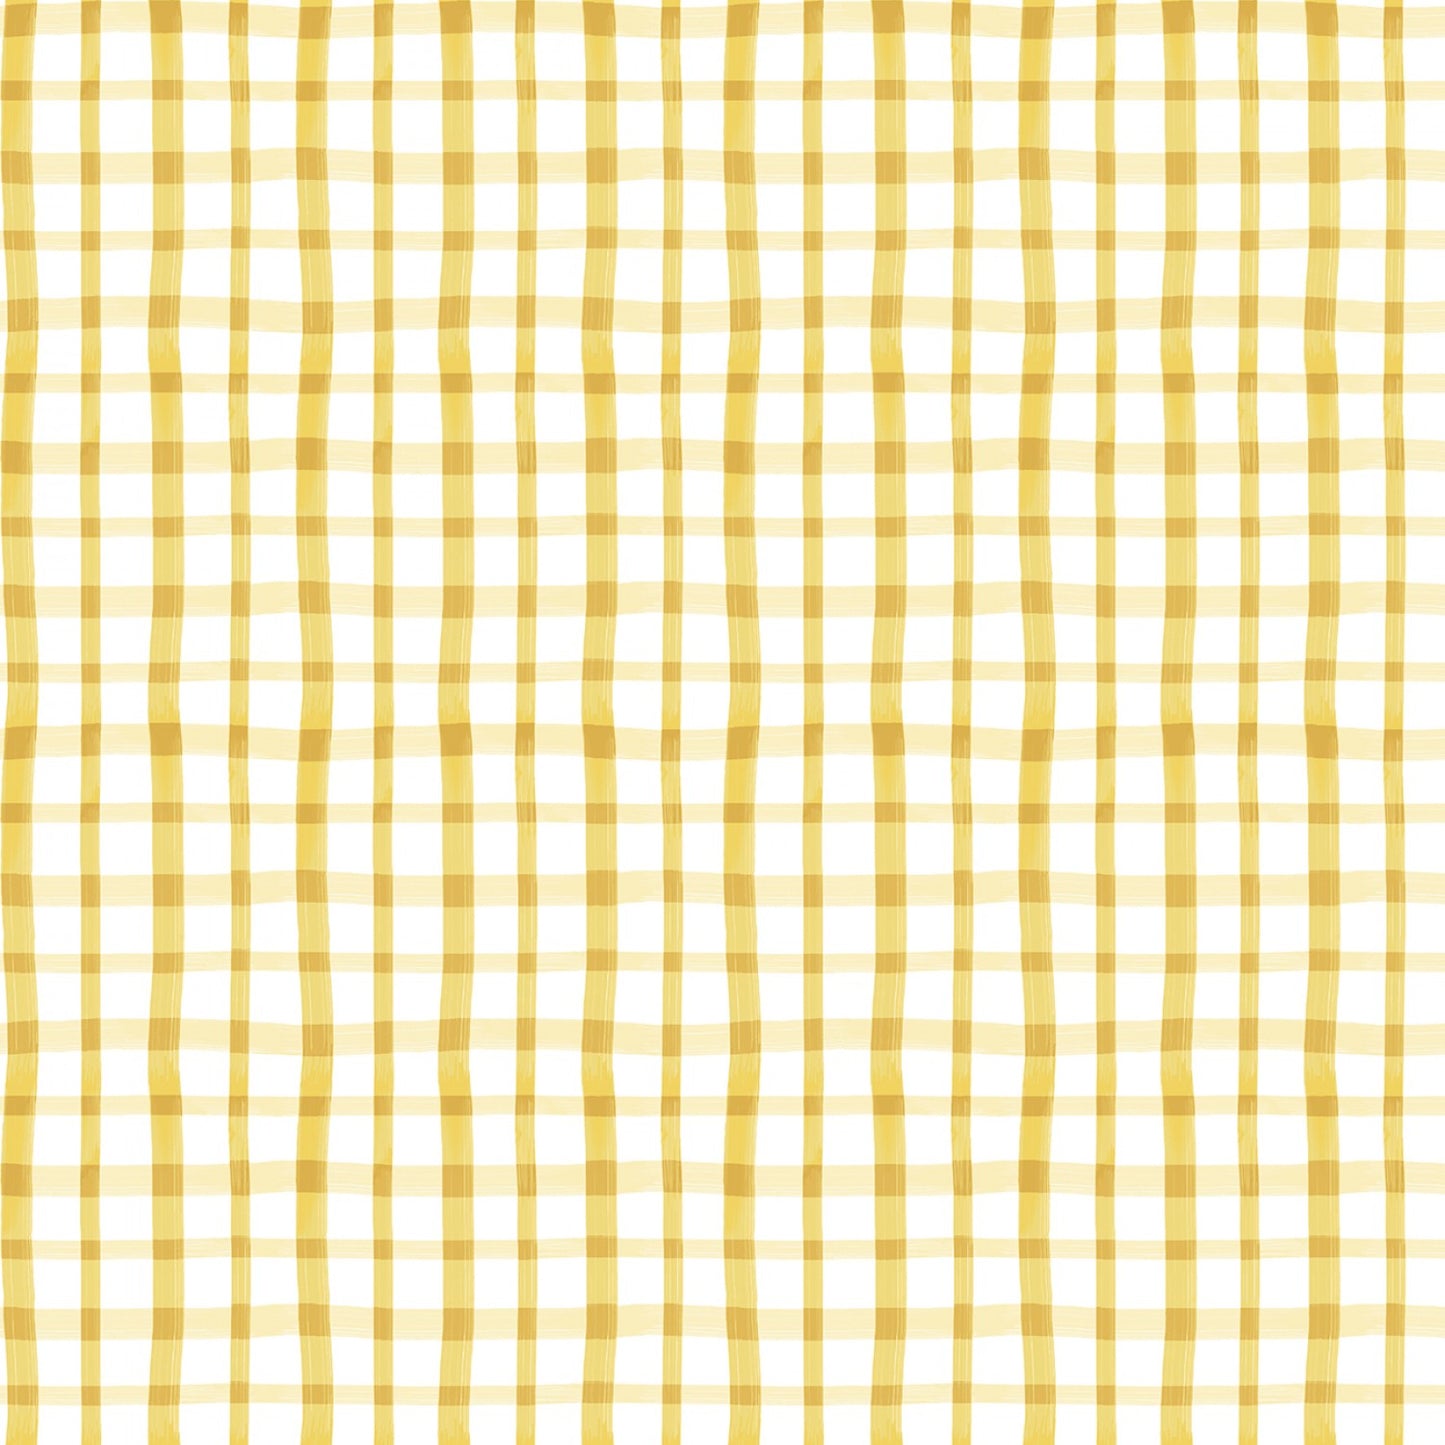 Sweet Plaid in Yellow - Weave & Woven